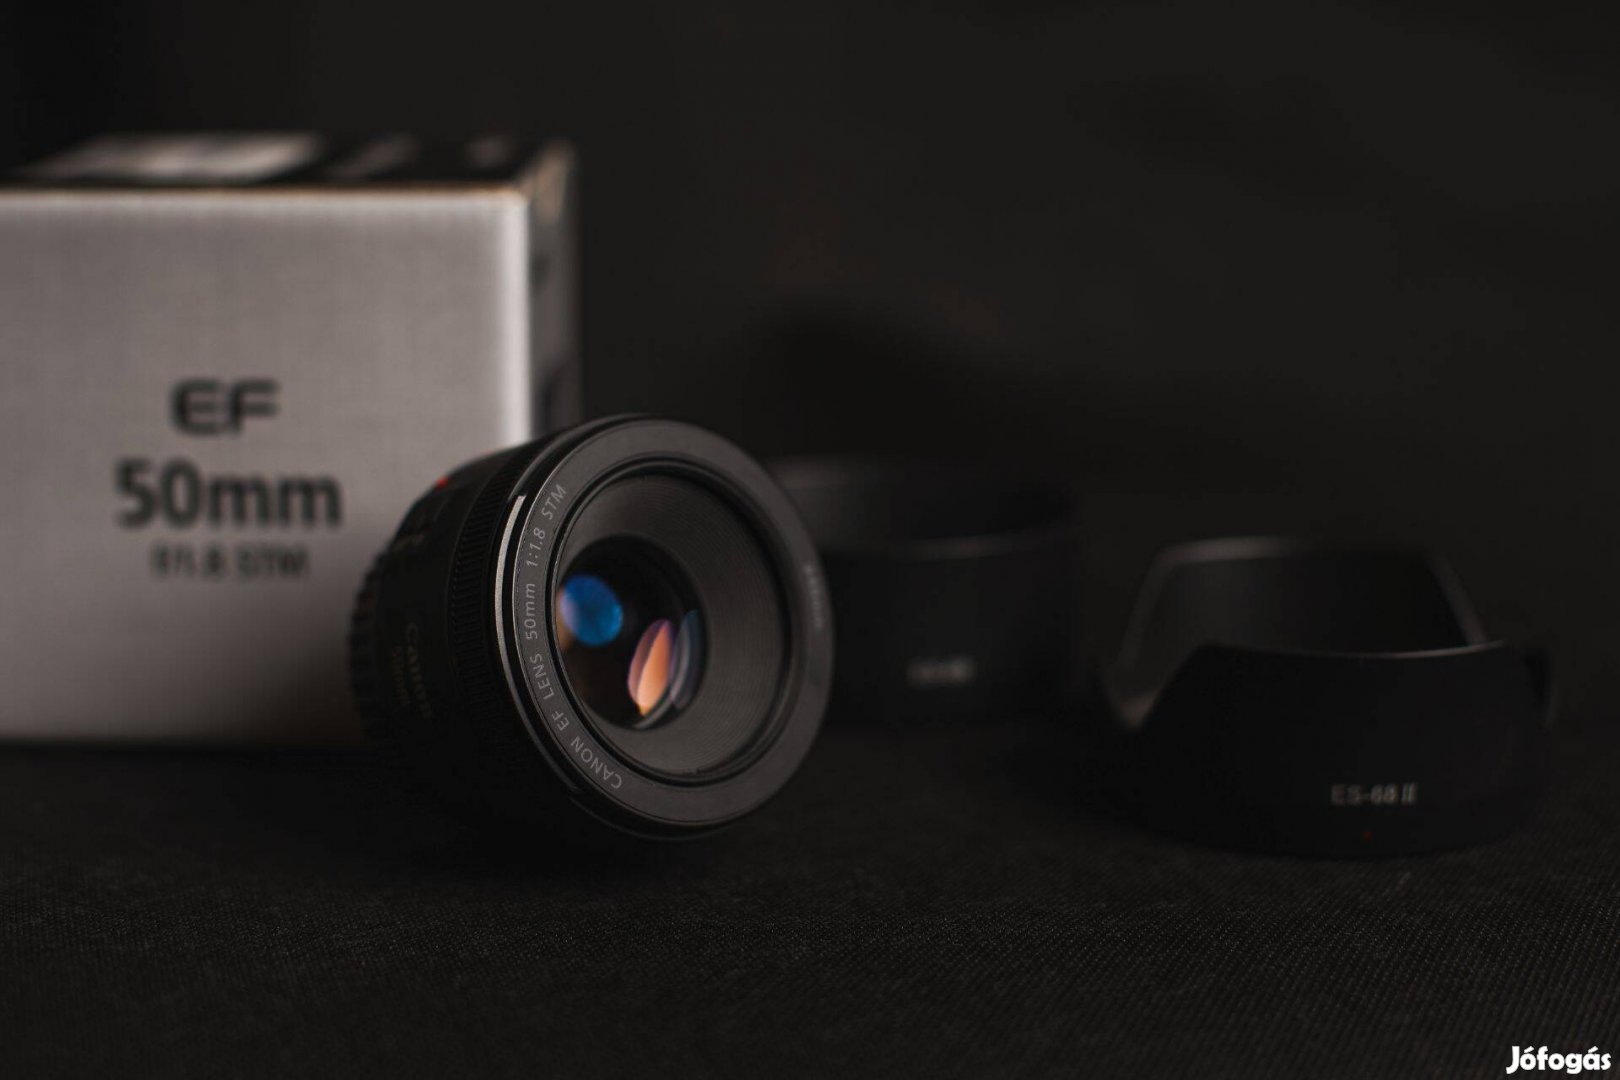 Canon 50mm f1.8 stm